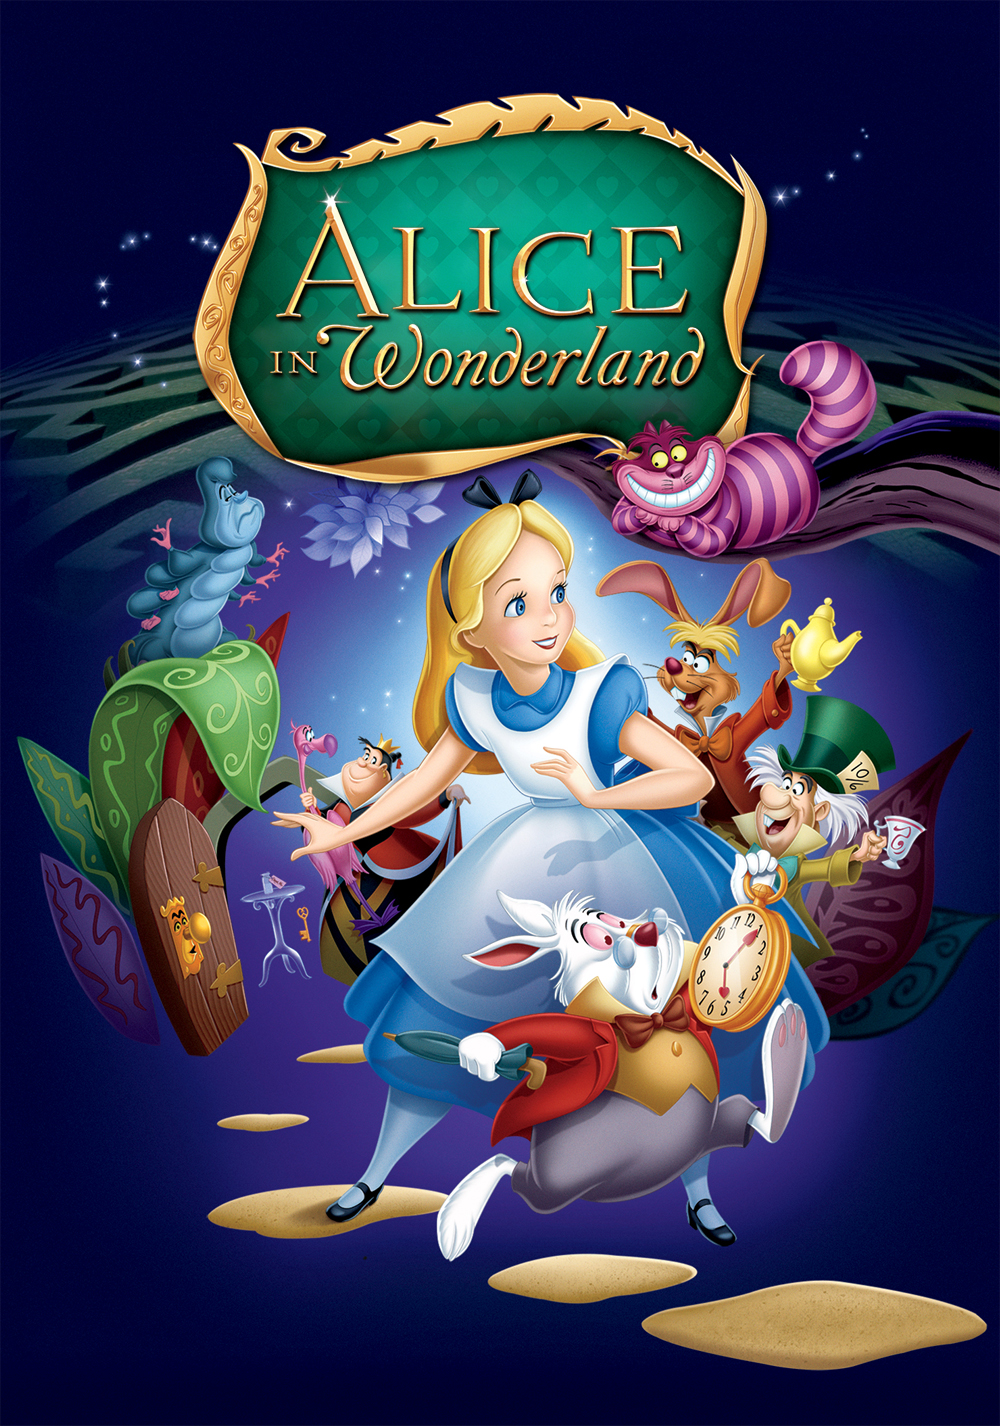 https://static.wikia.nocookie.net/filmguide/images/2/28/Alice_in_Wonderland_Poster.jpeg/revision/latest?cb=20200217222650